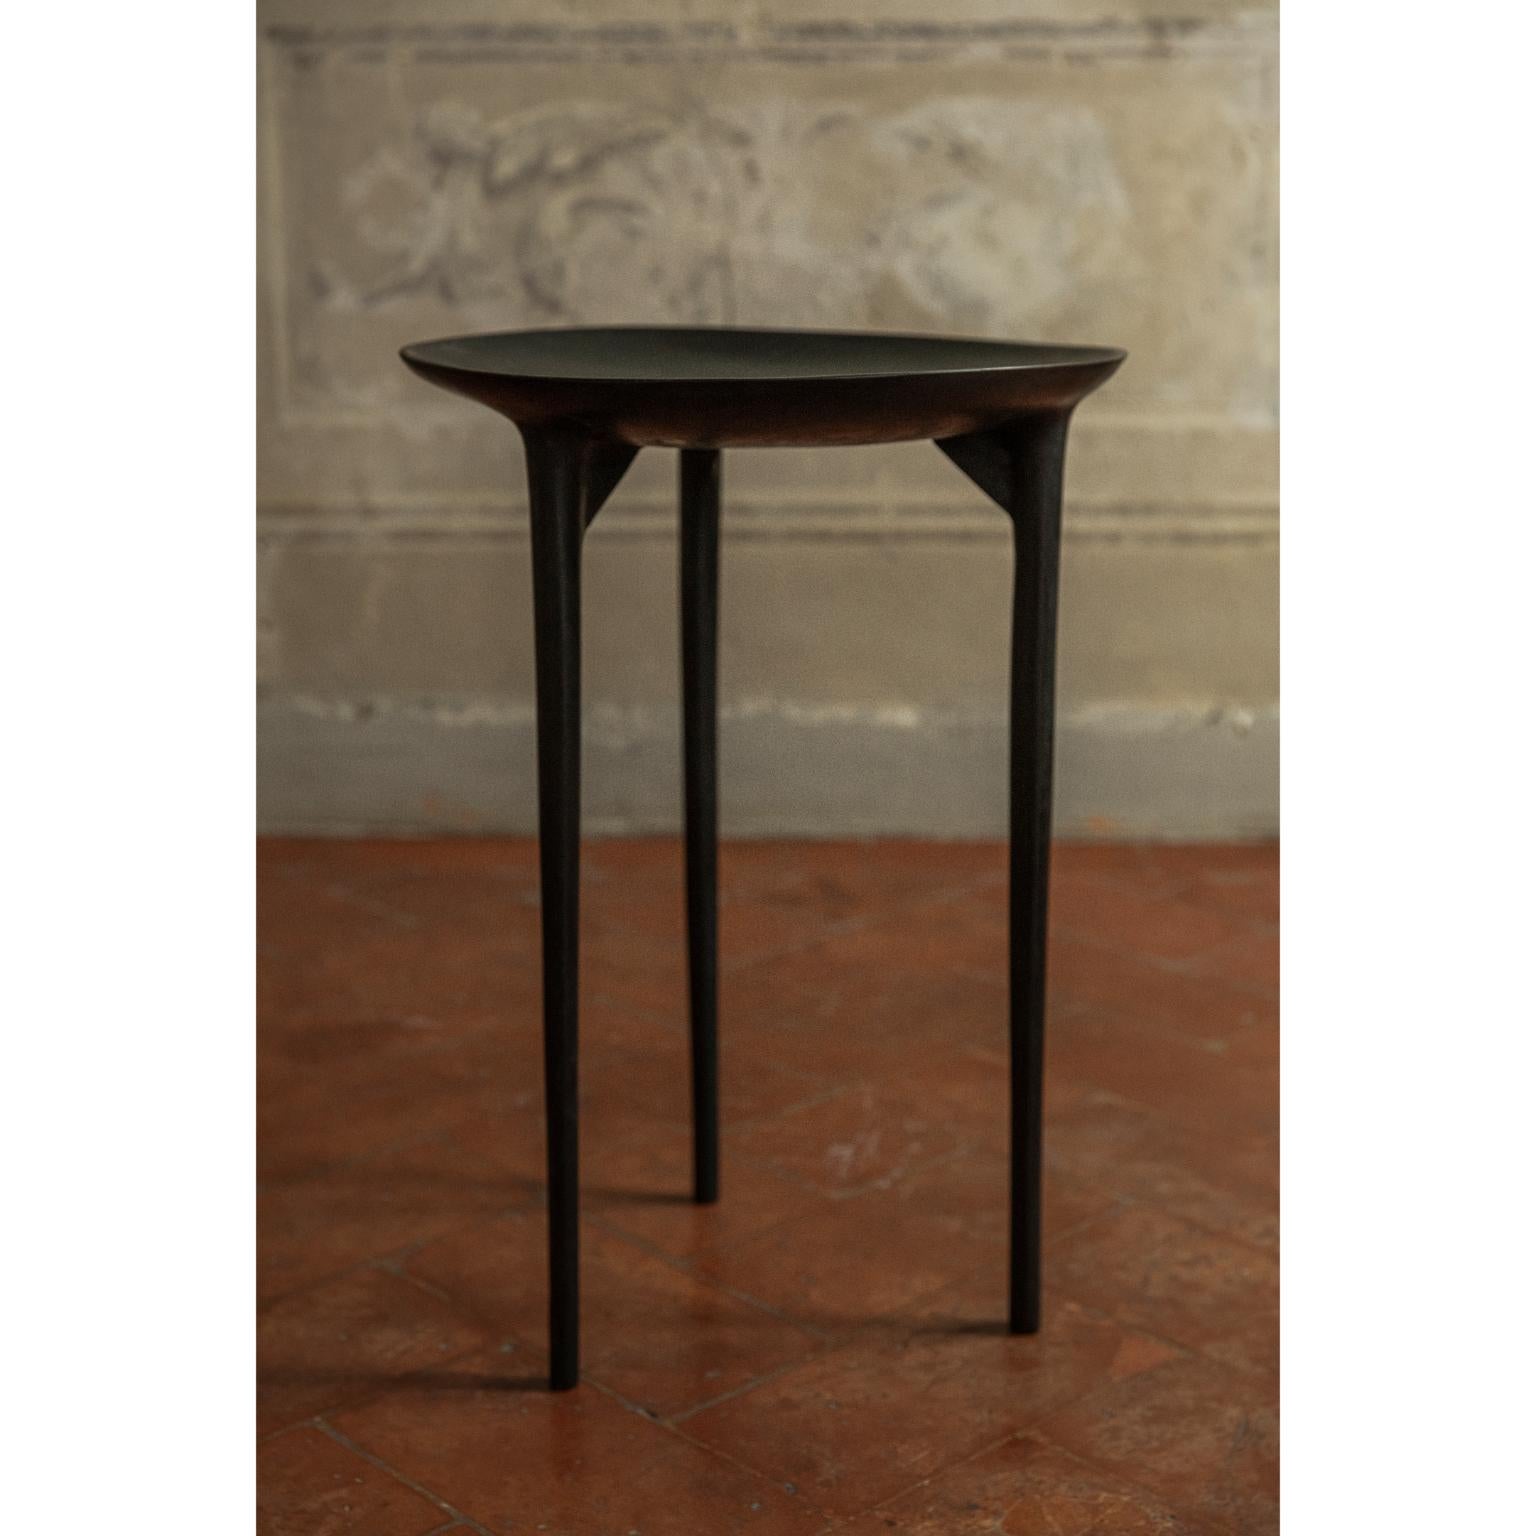 Tall brazier table by Rick Owens
2007
Dimensions: L 42 x W 42 x H 59 cm
Materials: Bronze
Weight: 25 kg

Available in black finish or Nitrate (Dark Brown) finish.

Rick Owens is a California-born fashion and furniture has developed a unique style